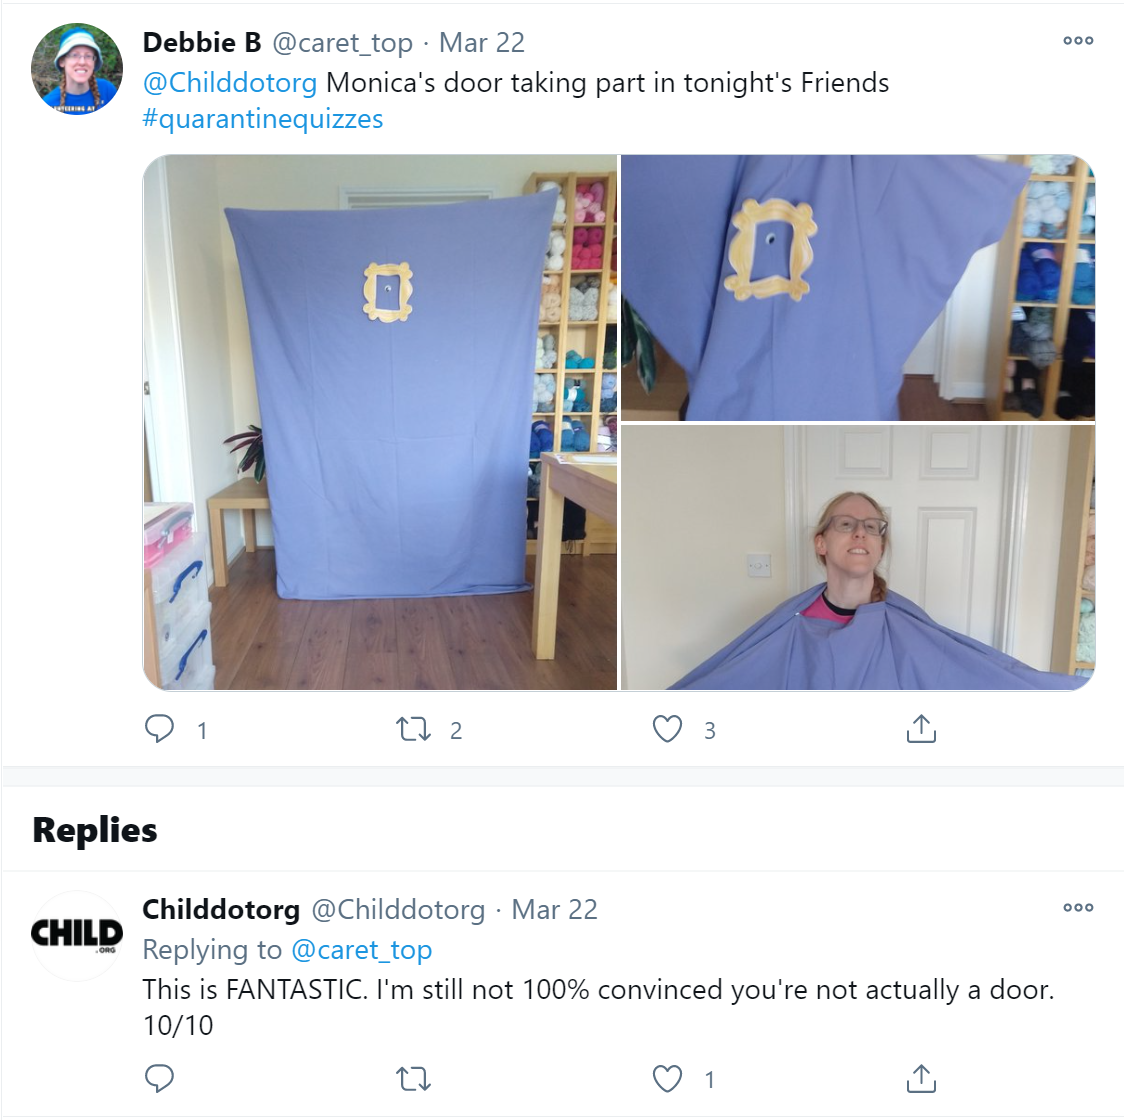 The nonprofit Child.org responds on Twitter to a supporter who has dressed up for one of its virtual fundraising events.